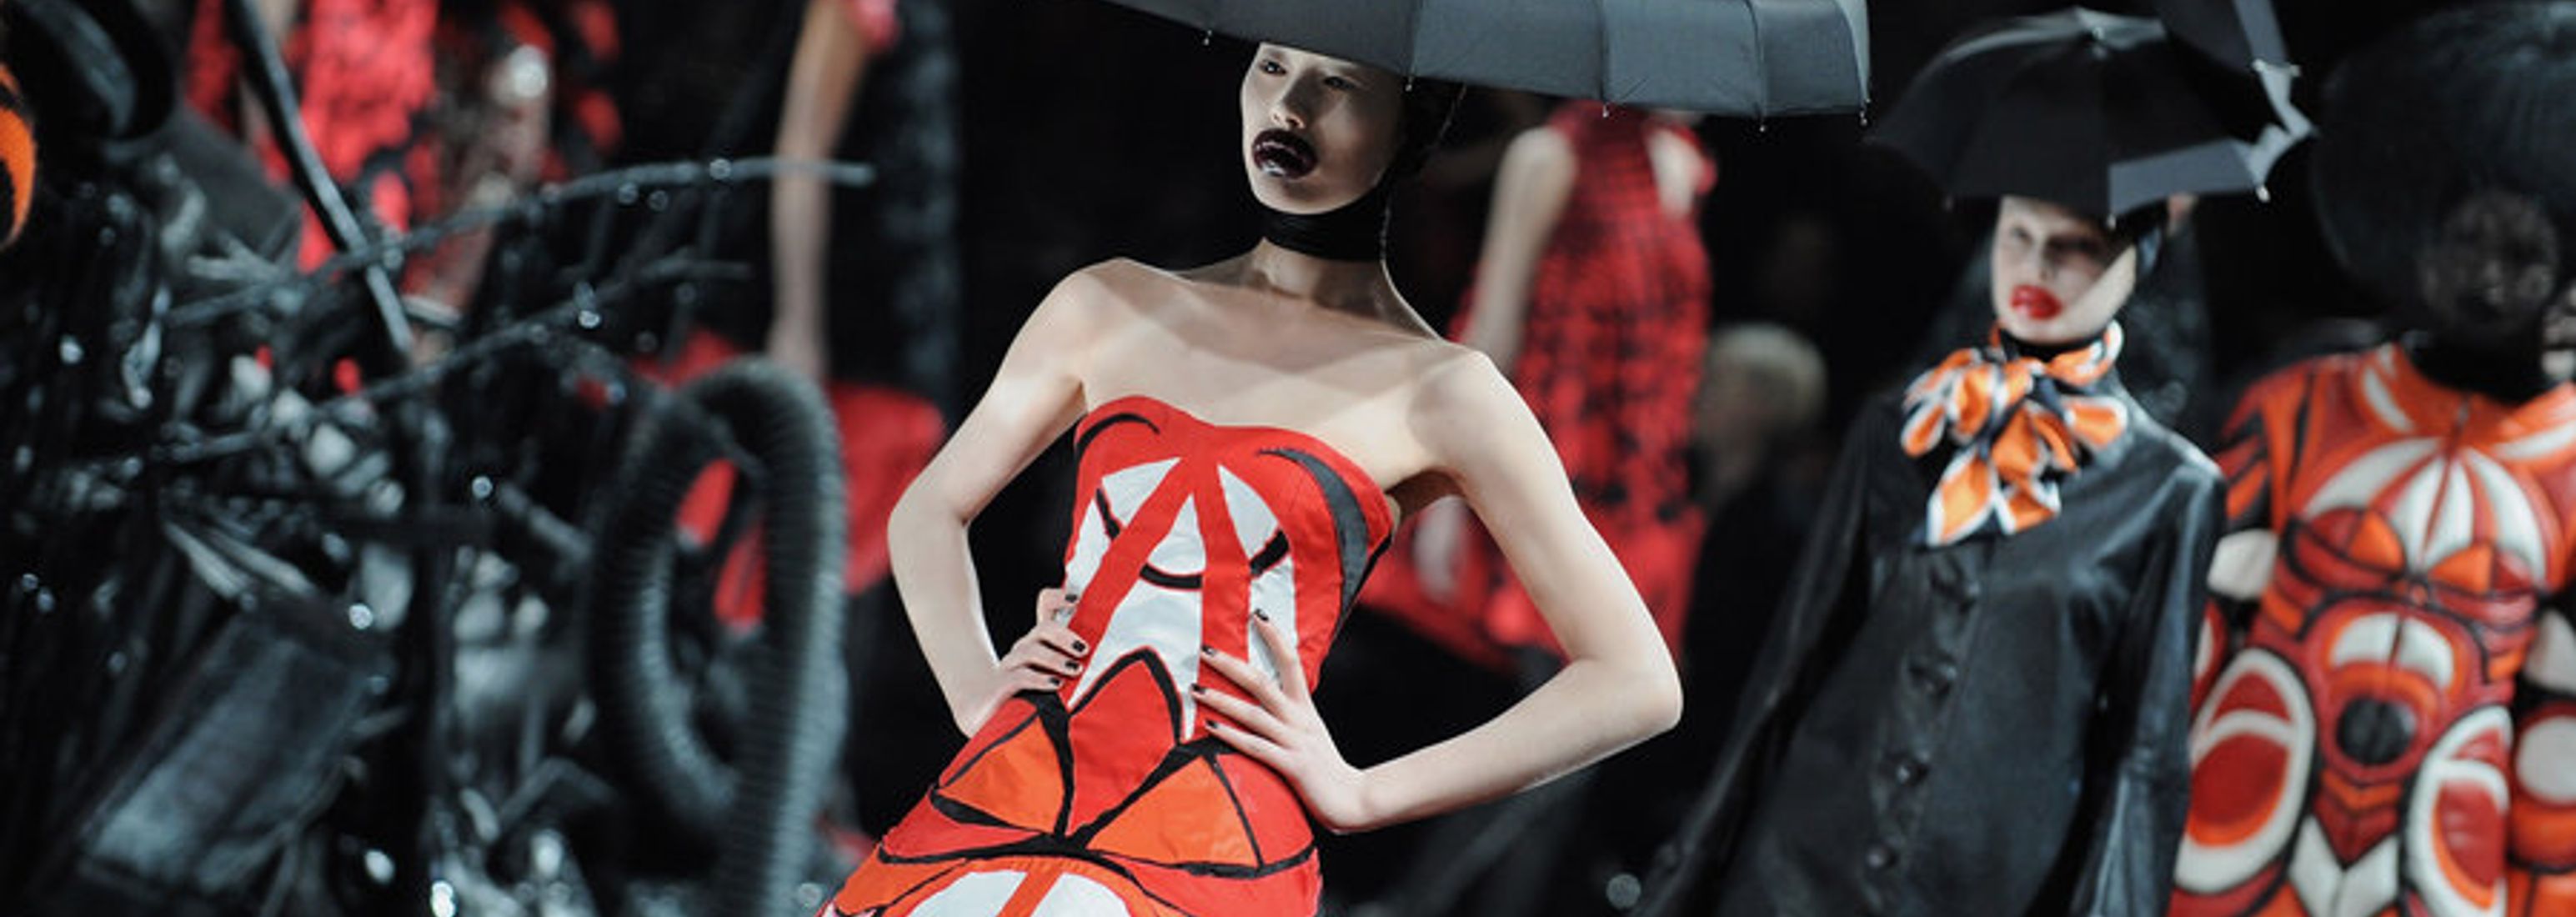 Alexander McQueen is helping London students to embark on a career in the  arts